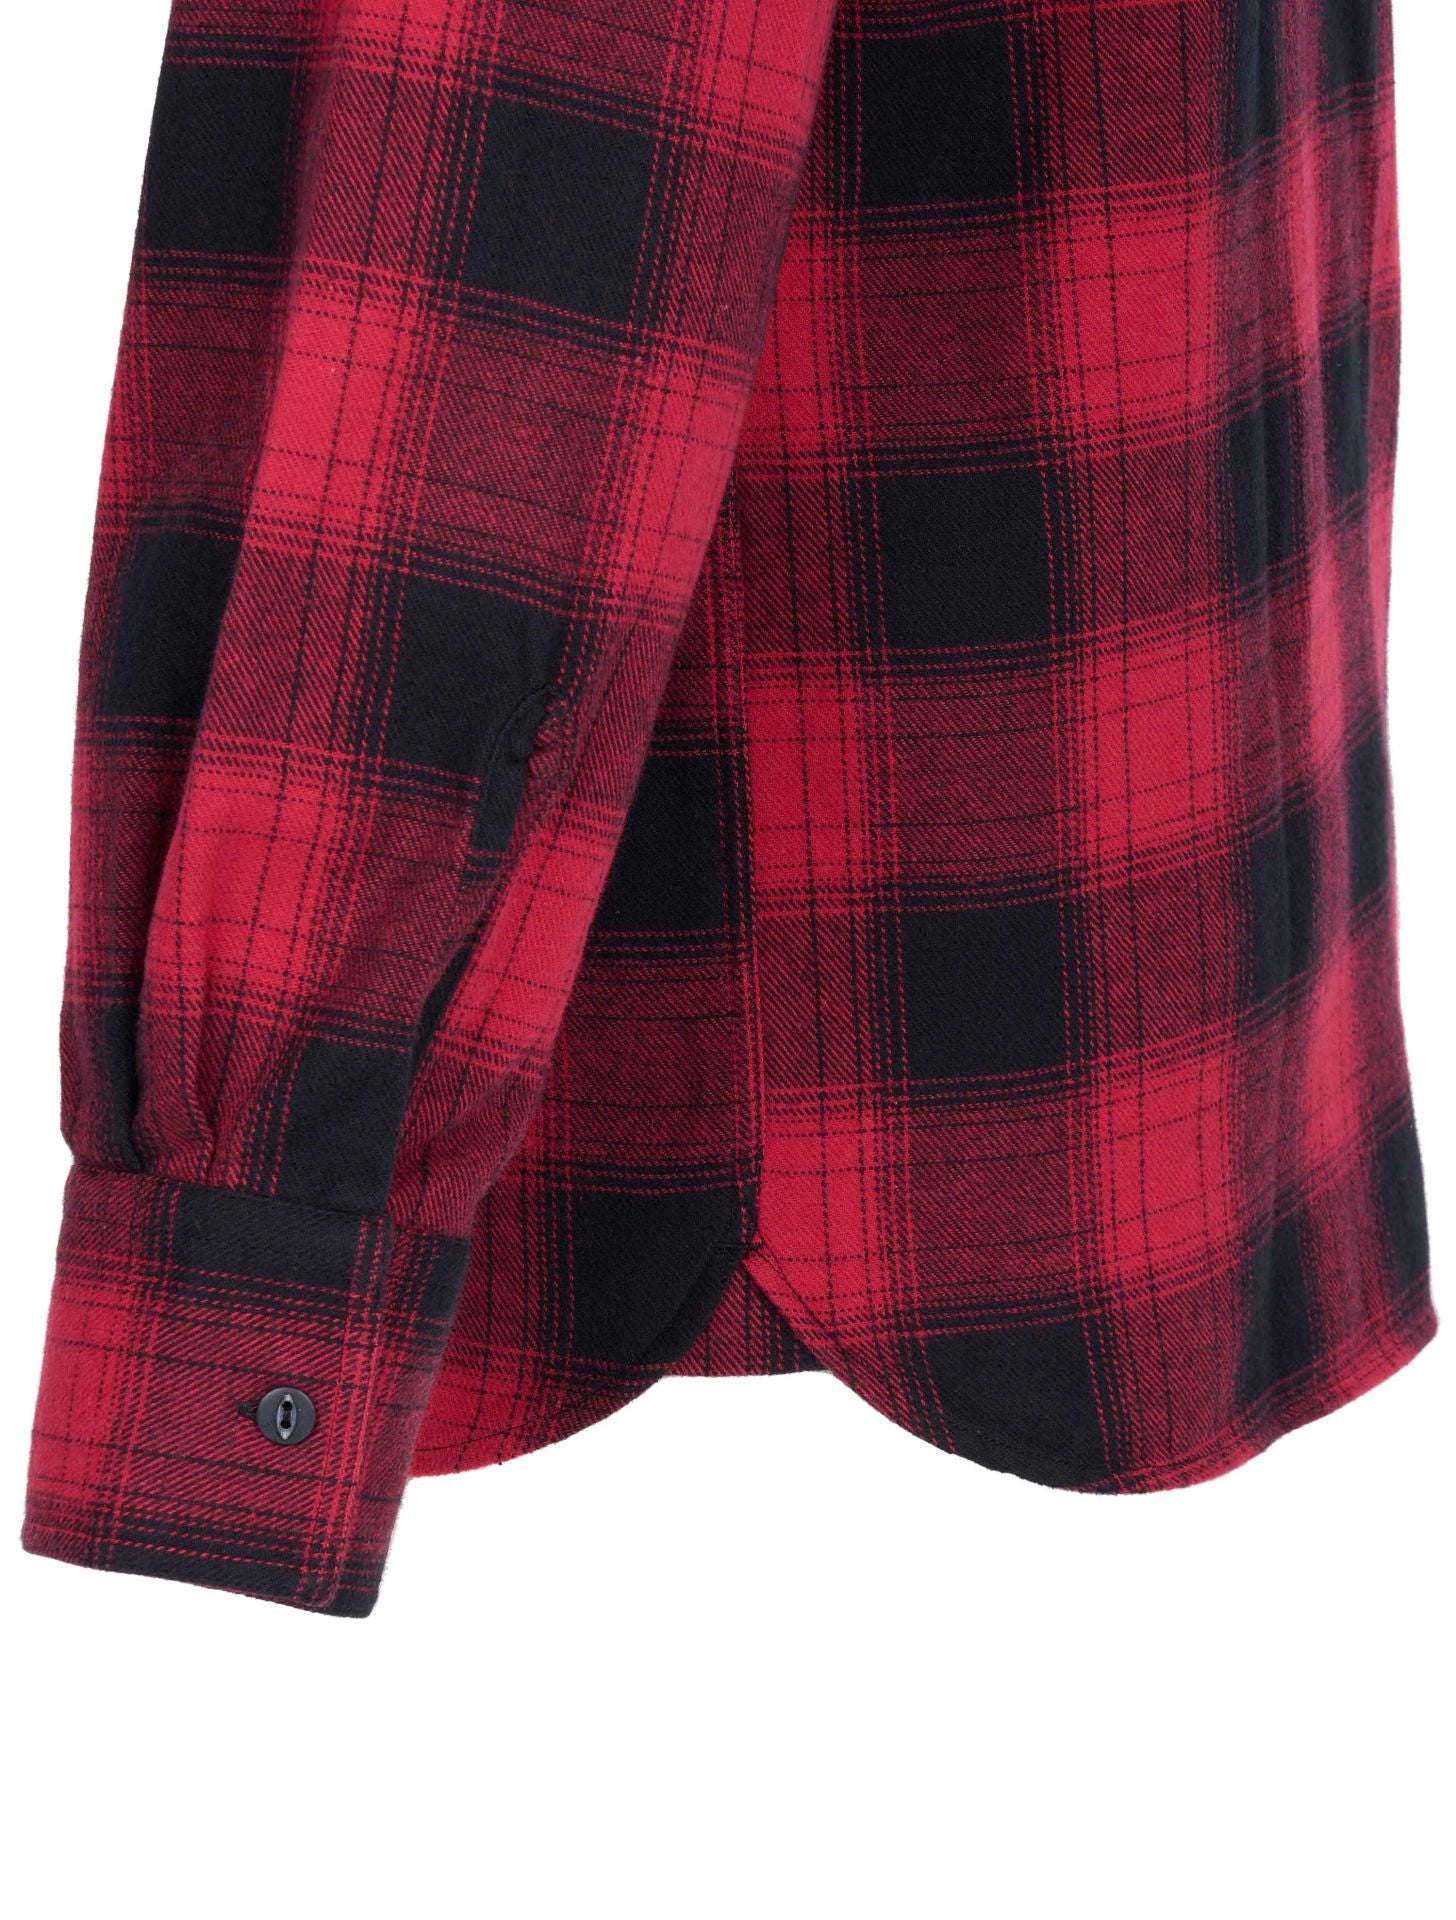 PIKE BROTHERS 1937 ROAMER SHIRT RED CHECK FLANNEL